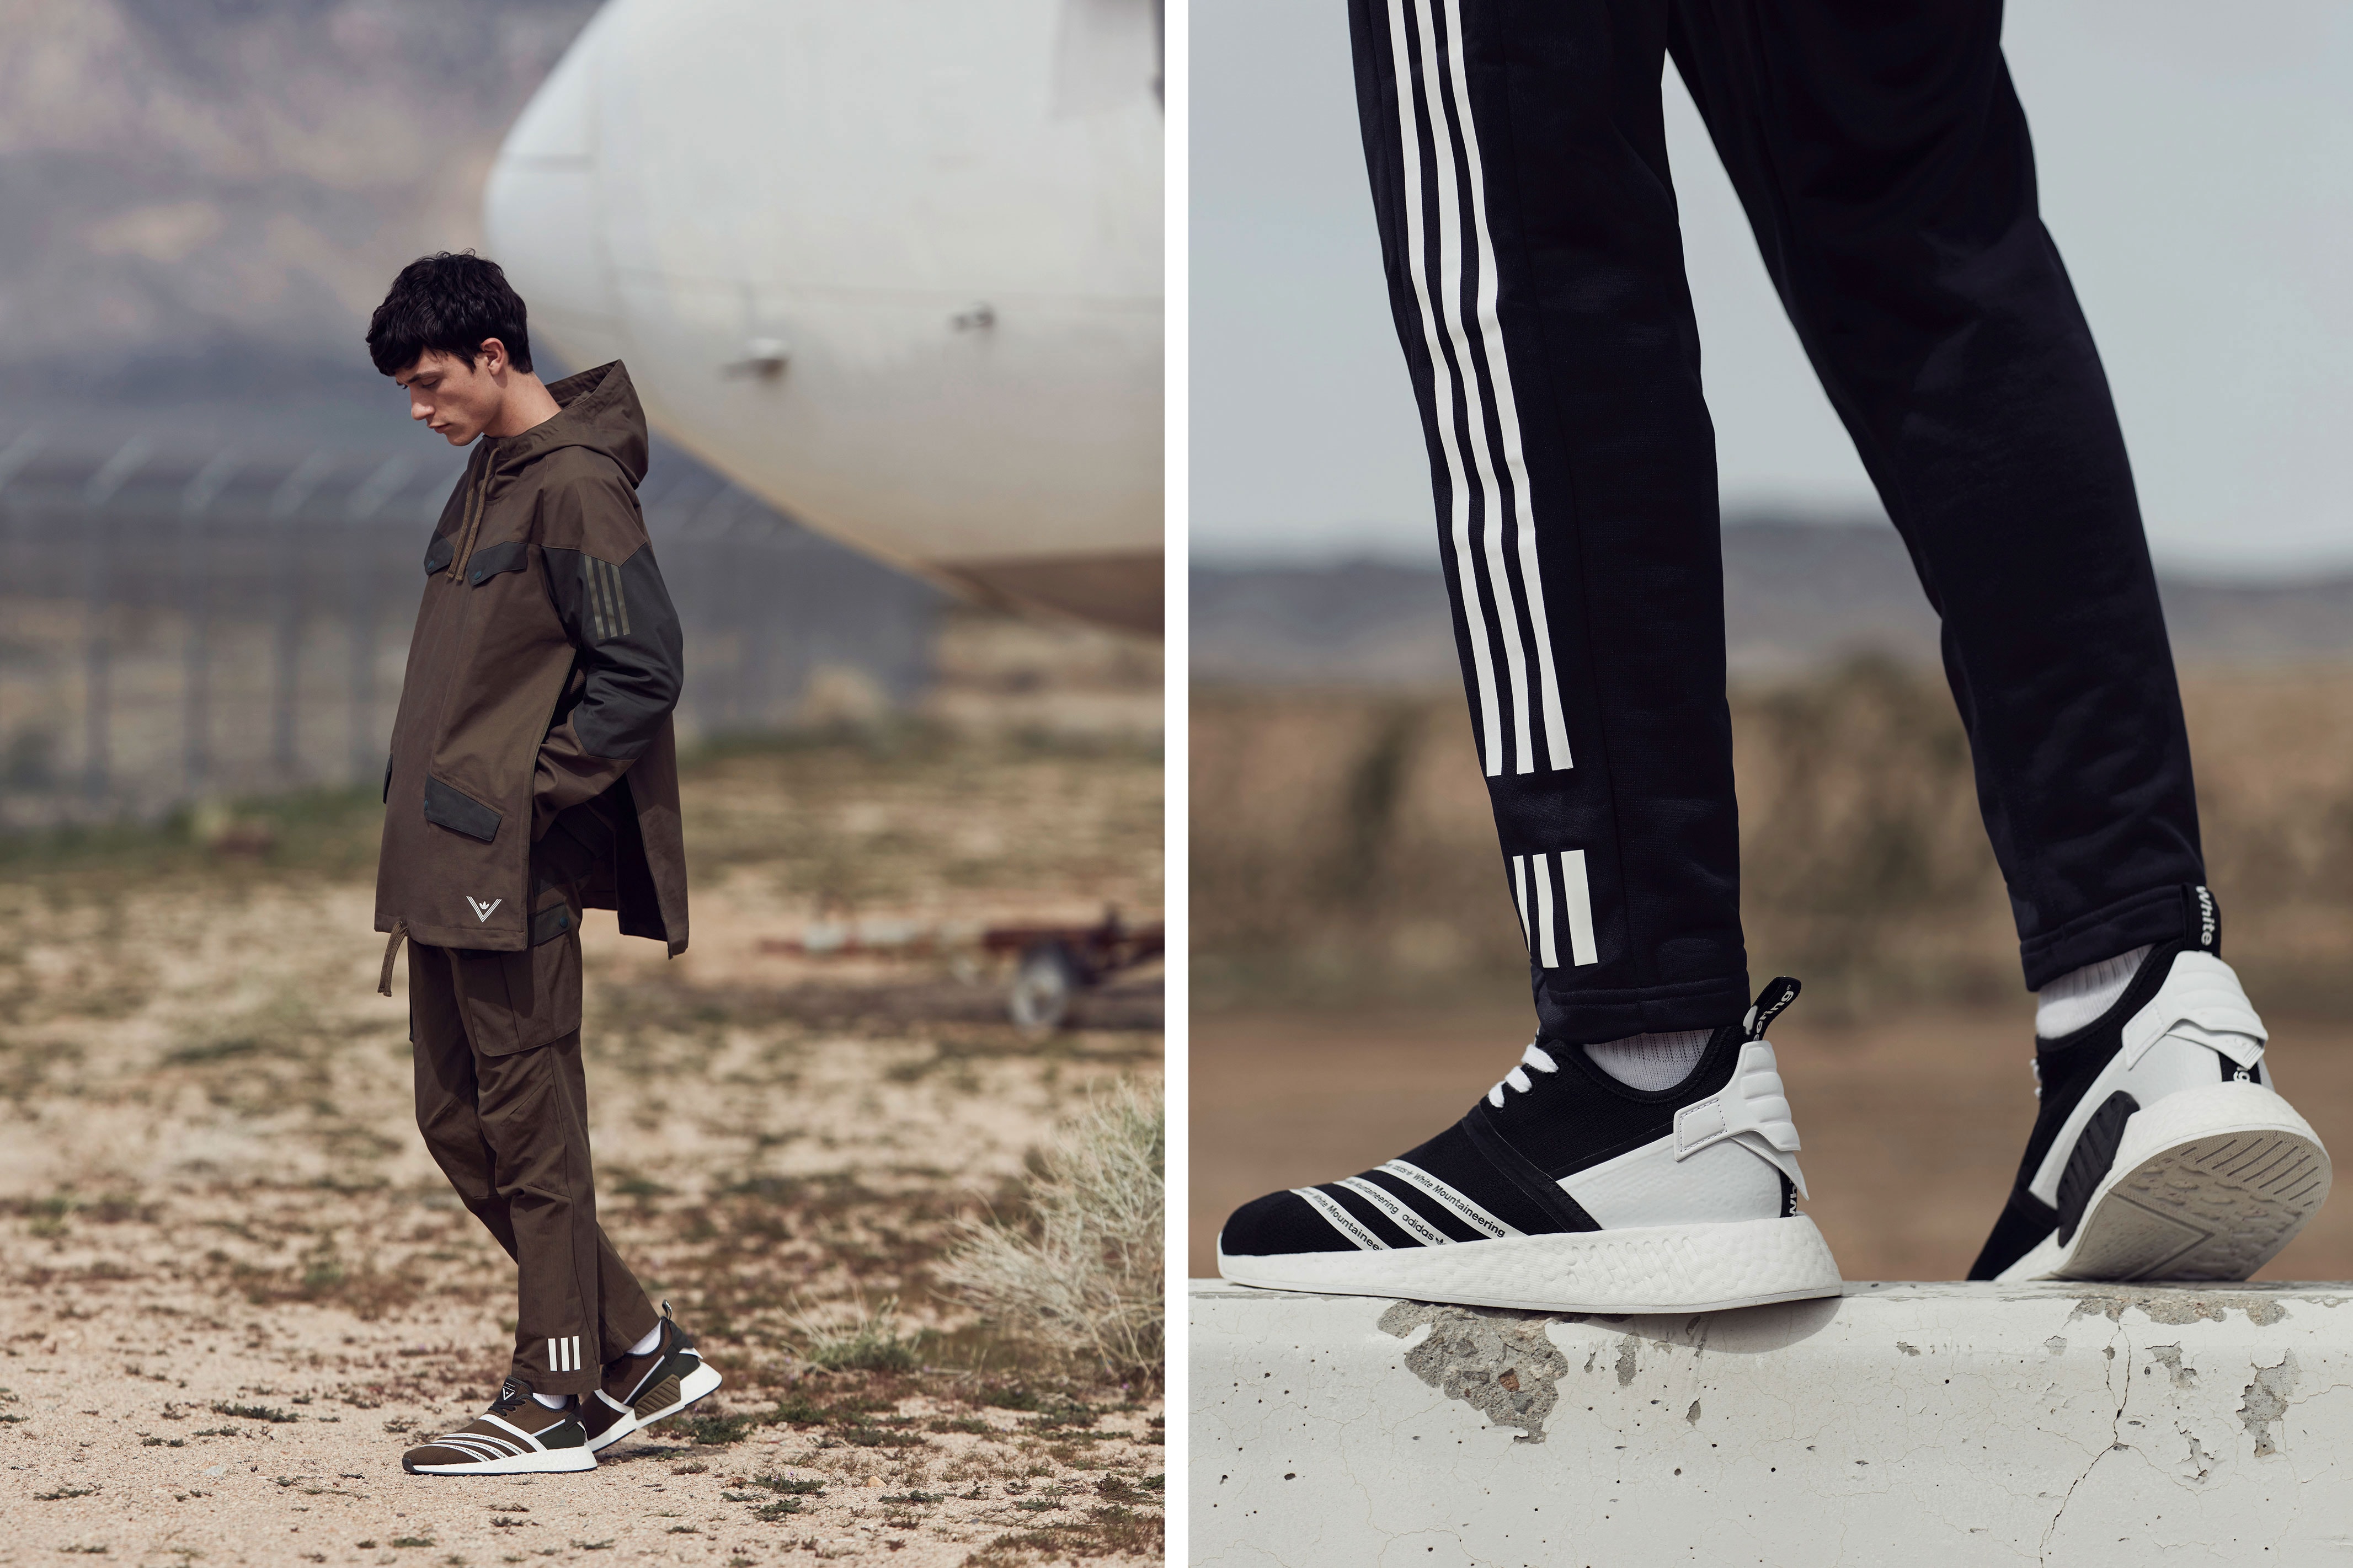 White Mountaineering adidas Originals 2017 Fall/Winter Collection